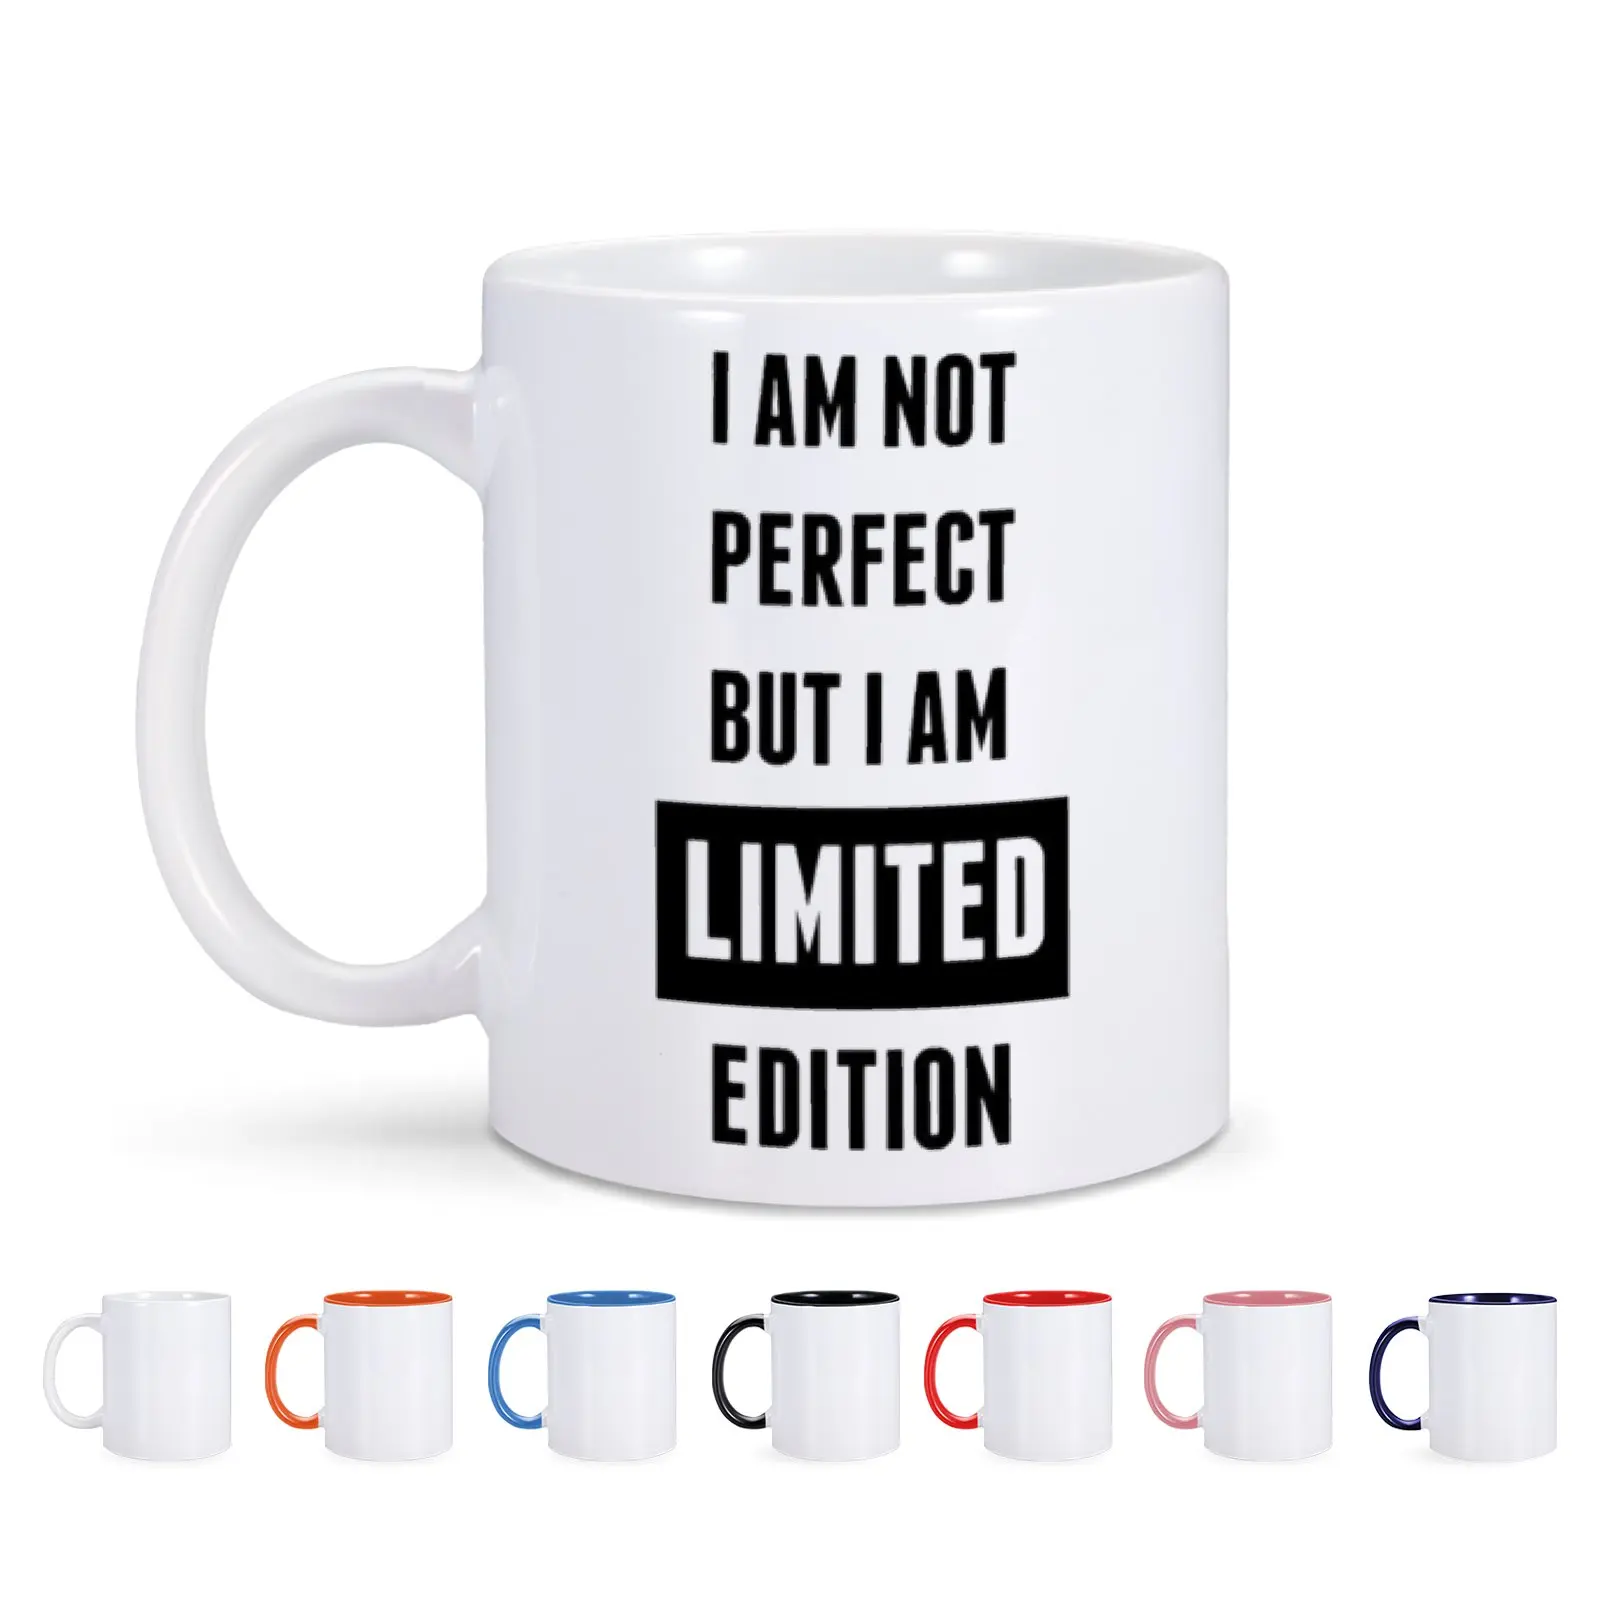 

I Am Not Perfect But I Am Limited Edition Ceramic Mug Coffee Cup Tea Milk Drinkware for Friend Coworker Self-encouragement Gift